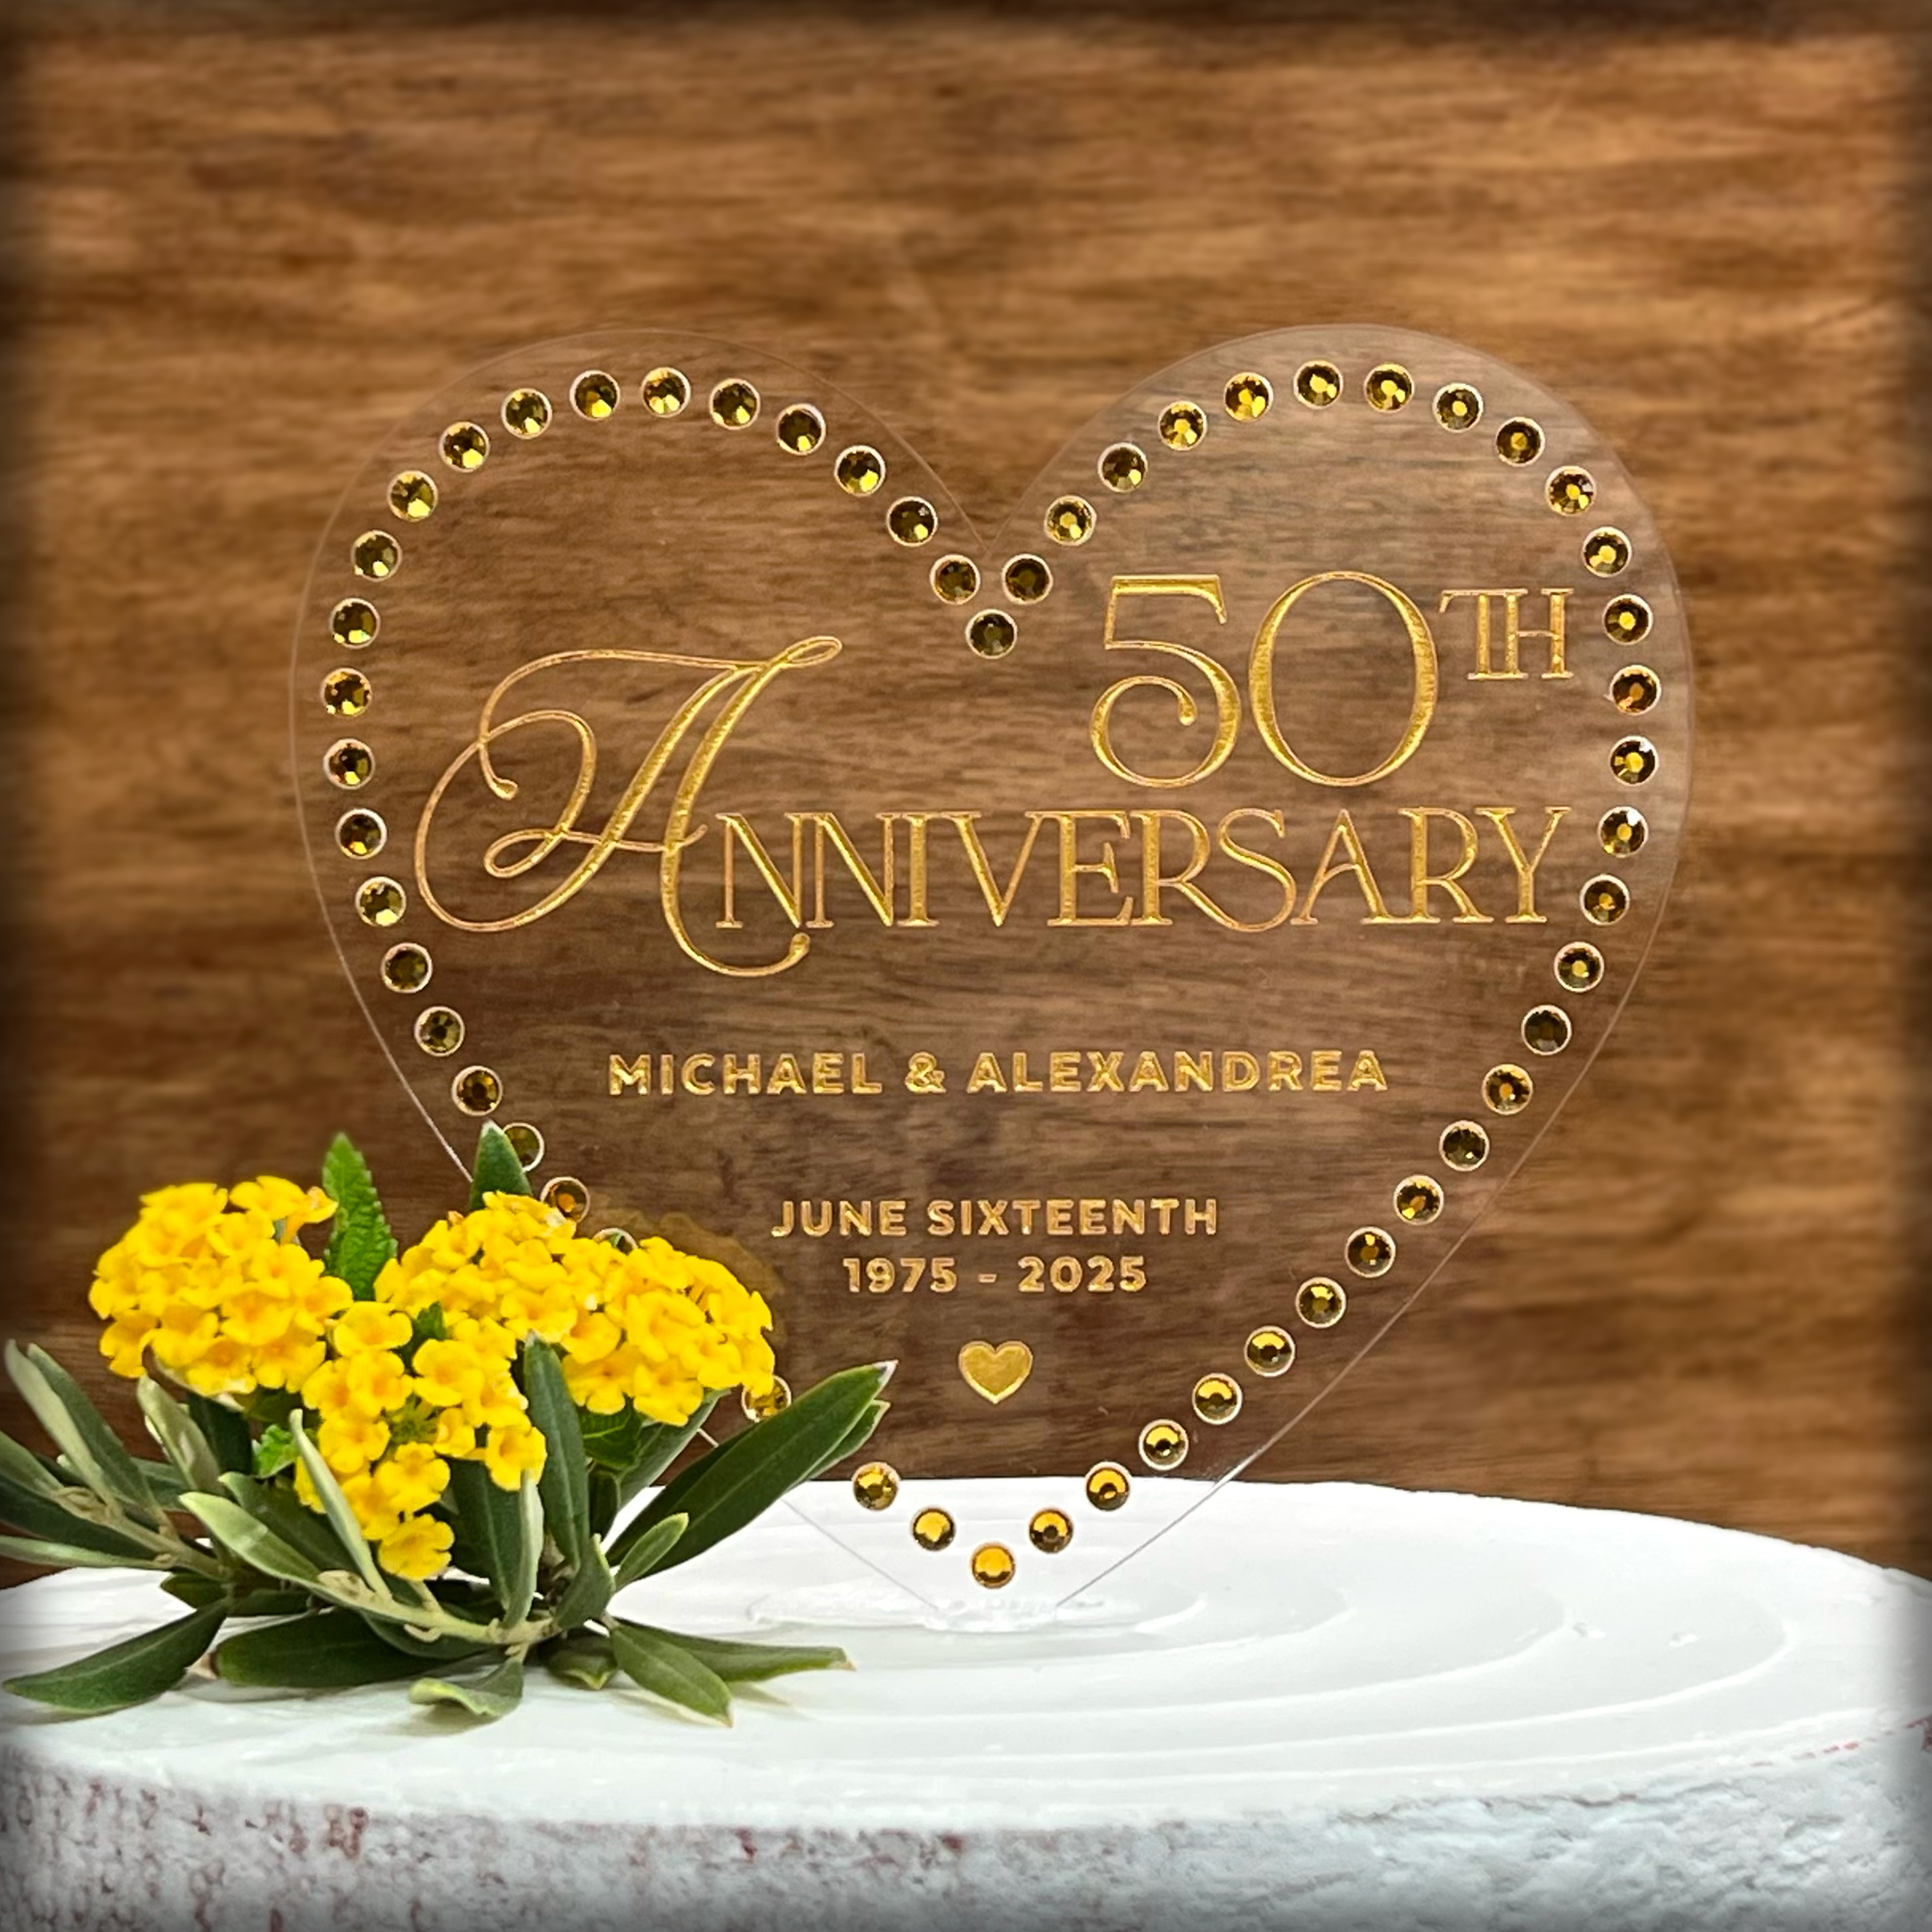 A classic symbol of love, the heart shape makes it the perfect choice for an anniversary cake topper. The clear acrylic material gives the topper a modern and sleek look that will complement any cake design. The gold rhinestone border and gold painted text, which reads "Happy Anniversary", adds a touch of glamour and luxury to the topper, making it stand out as a true centerpiece of your anniversary celebration capturing the essence of the occasion. This anniversary cake topper is not only beautiful, but a long-lasting cherished keepsake for years to come.